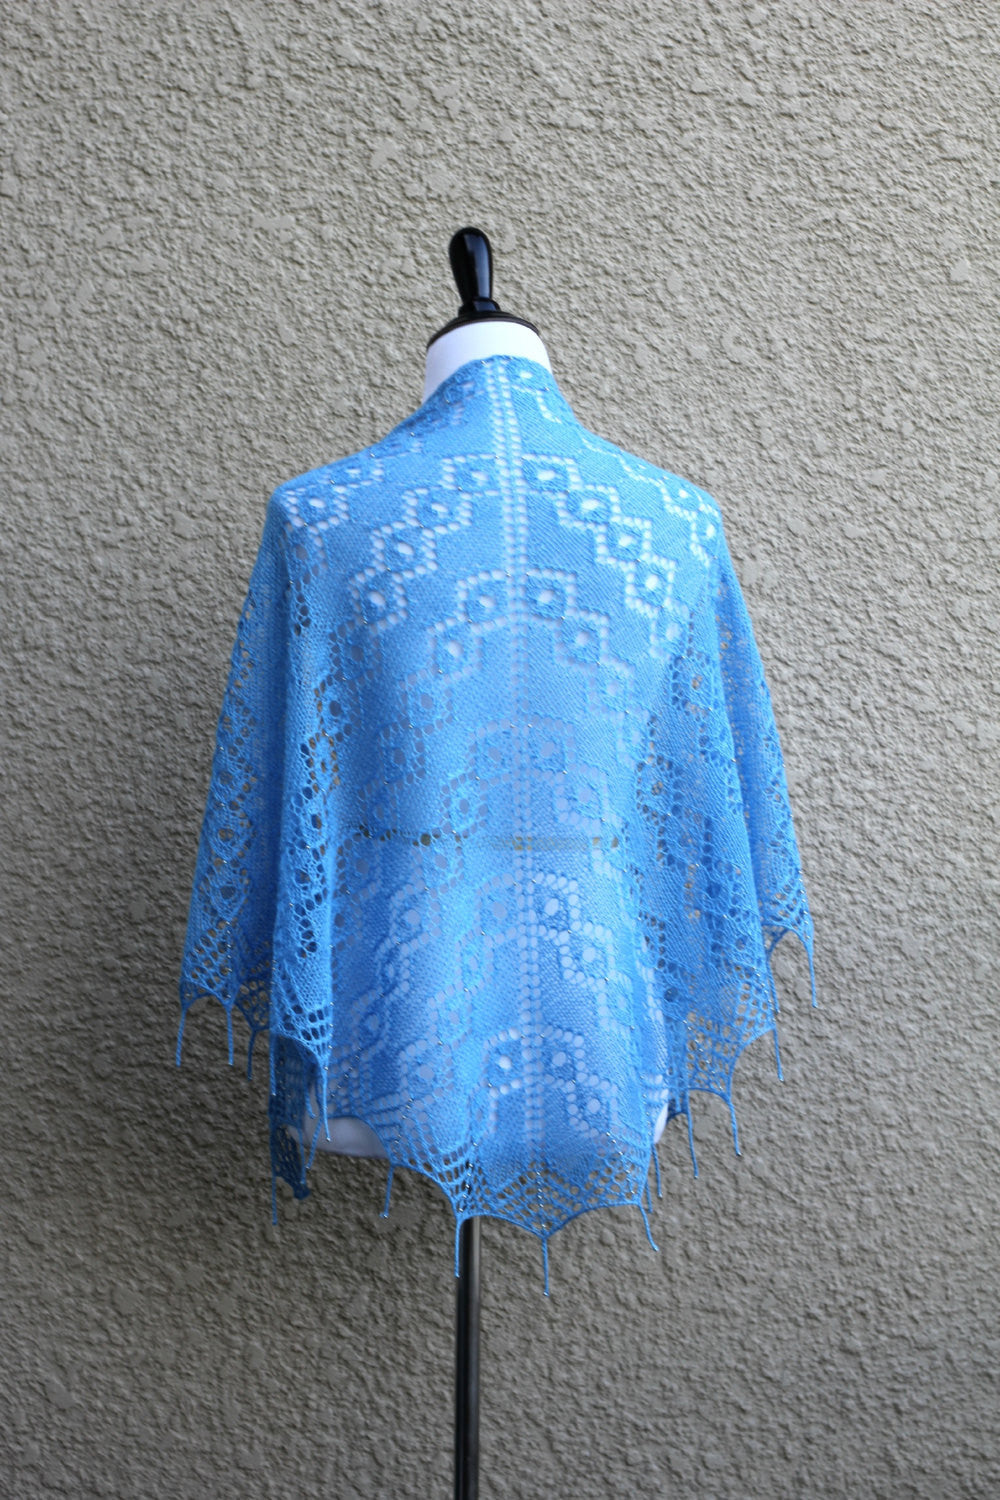 Lace shawl with beads